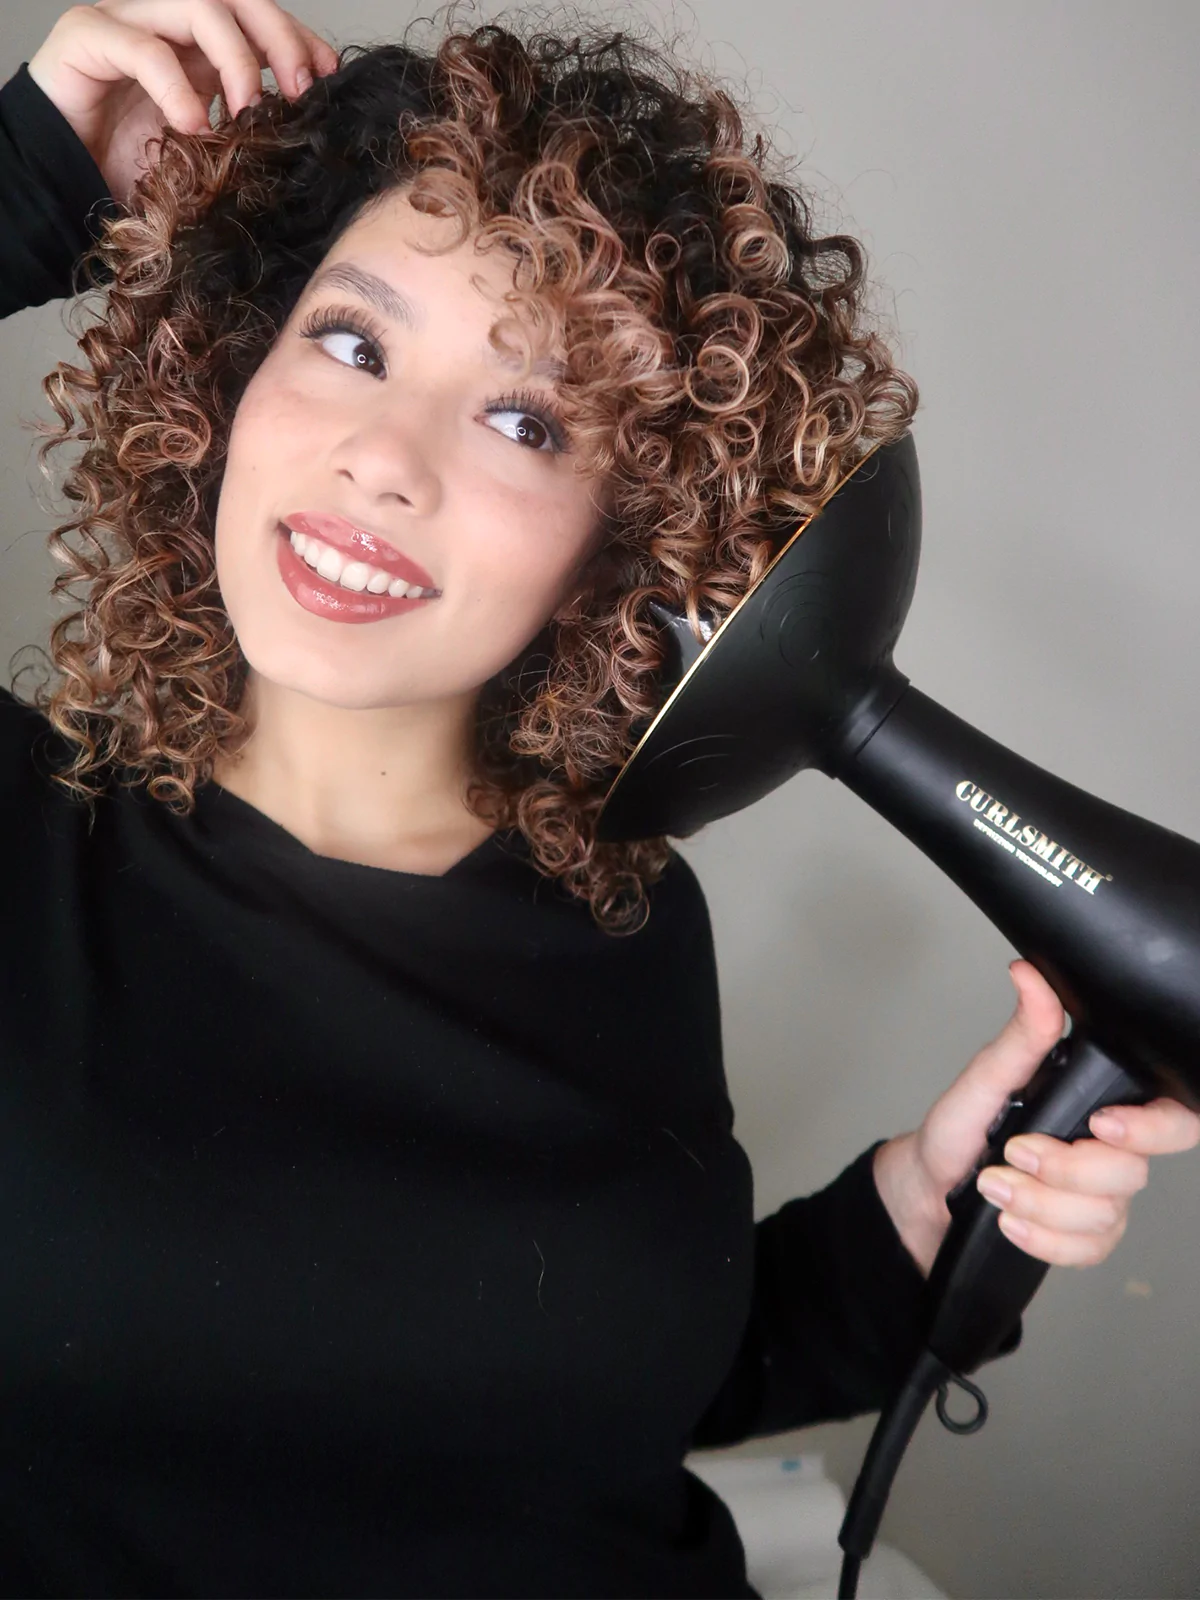 TikTok's Latest Haircare Hack Involves Using a Pasta Strainer to Diffuse Hair